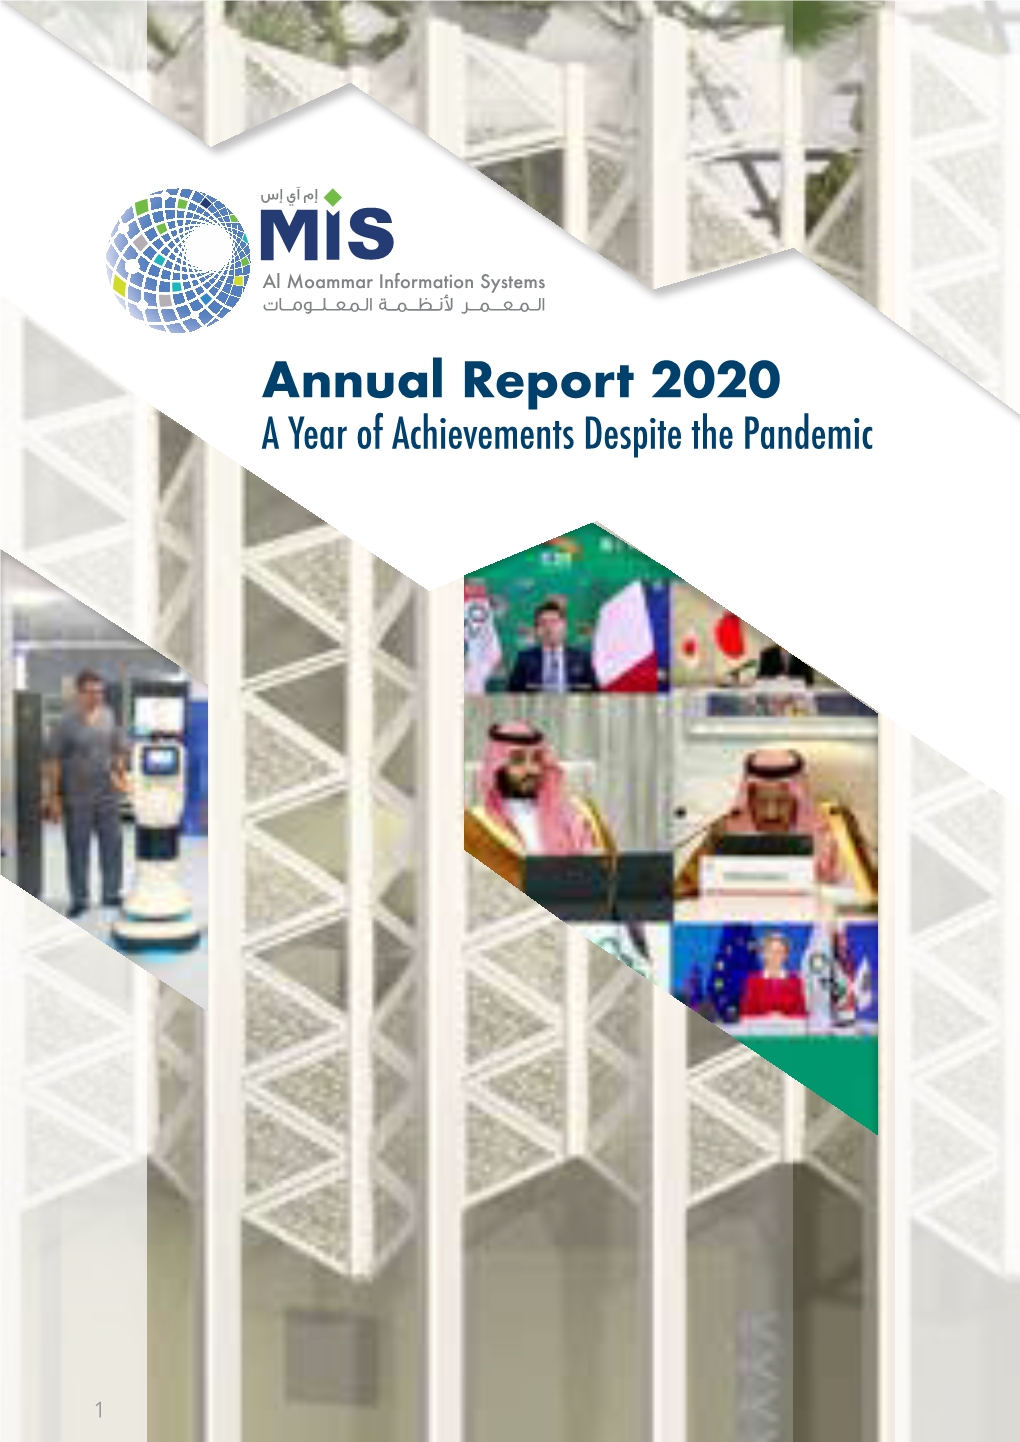 Annual Report 2020 a Year of Achievements Despite the Pandemic